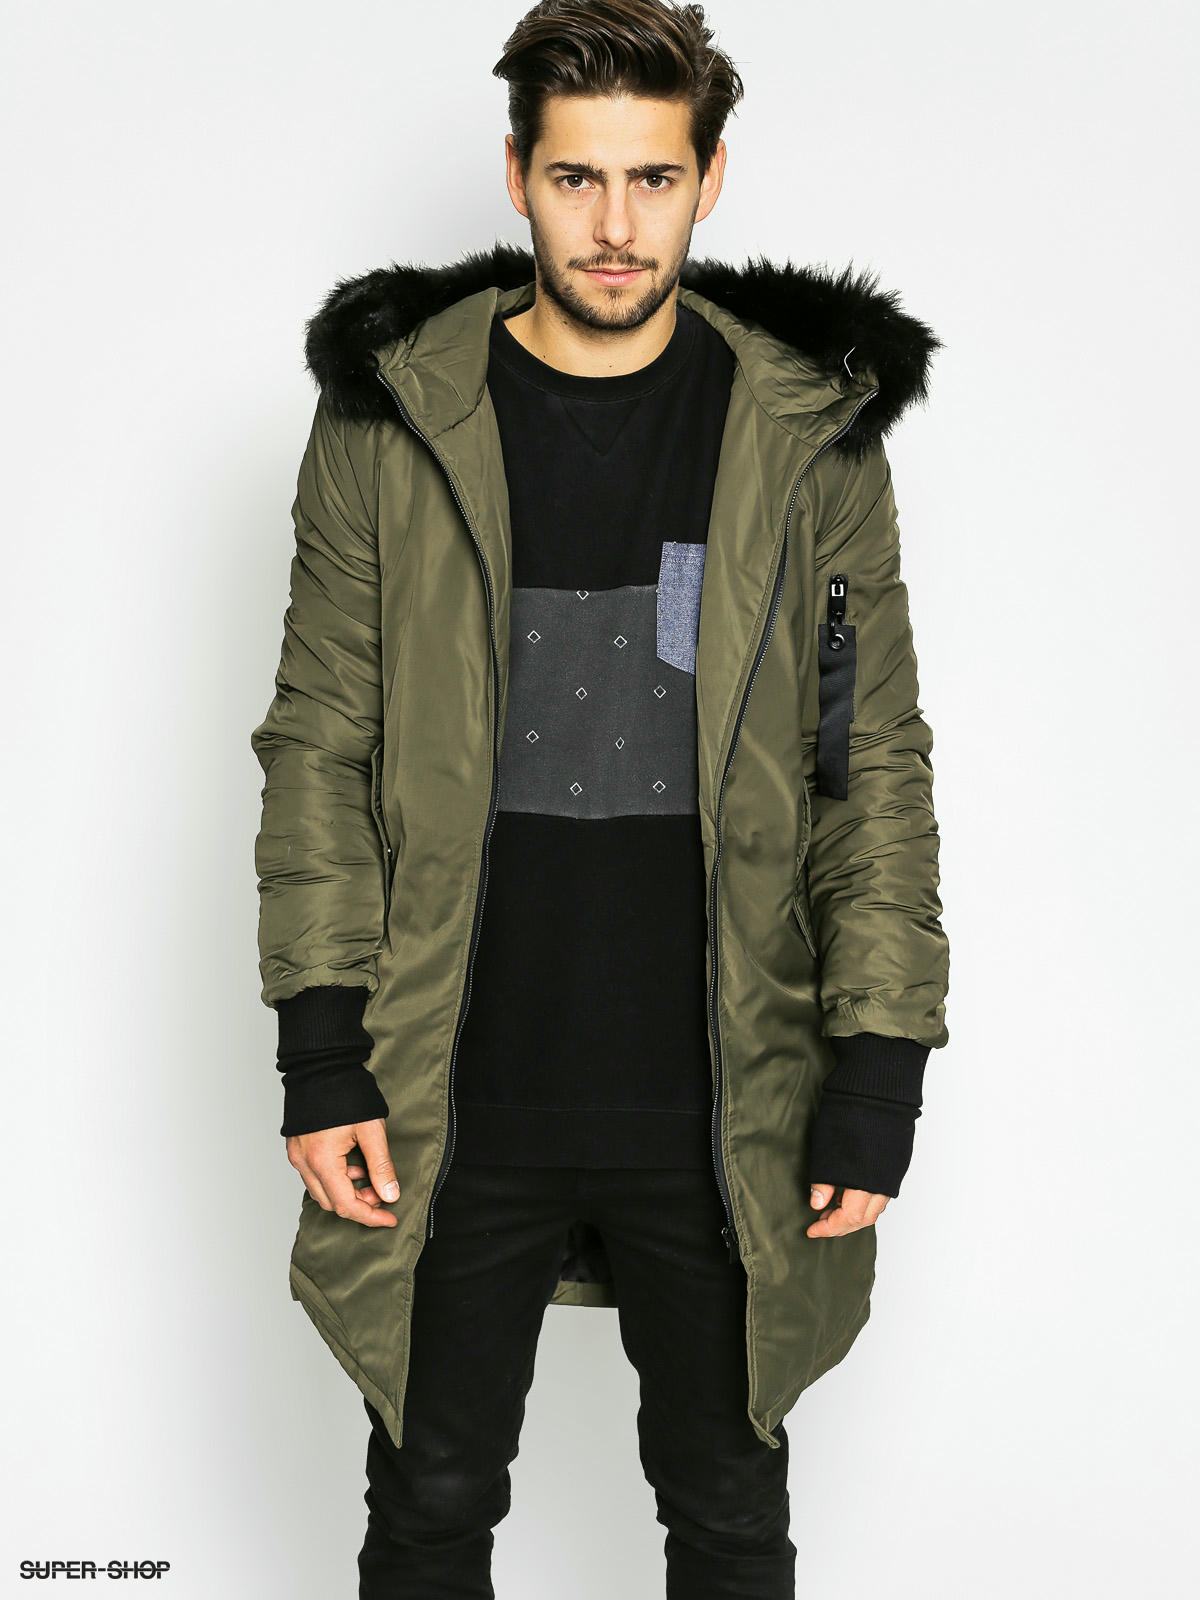 Club Room Men's Parka with a Faux Fur-Hood Jacket, Created for